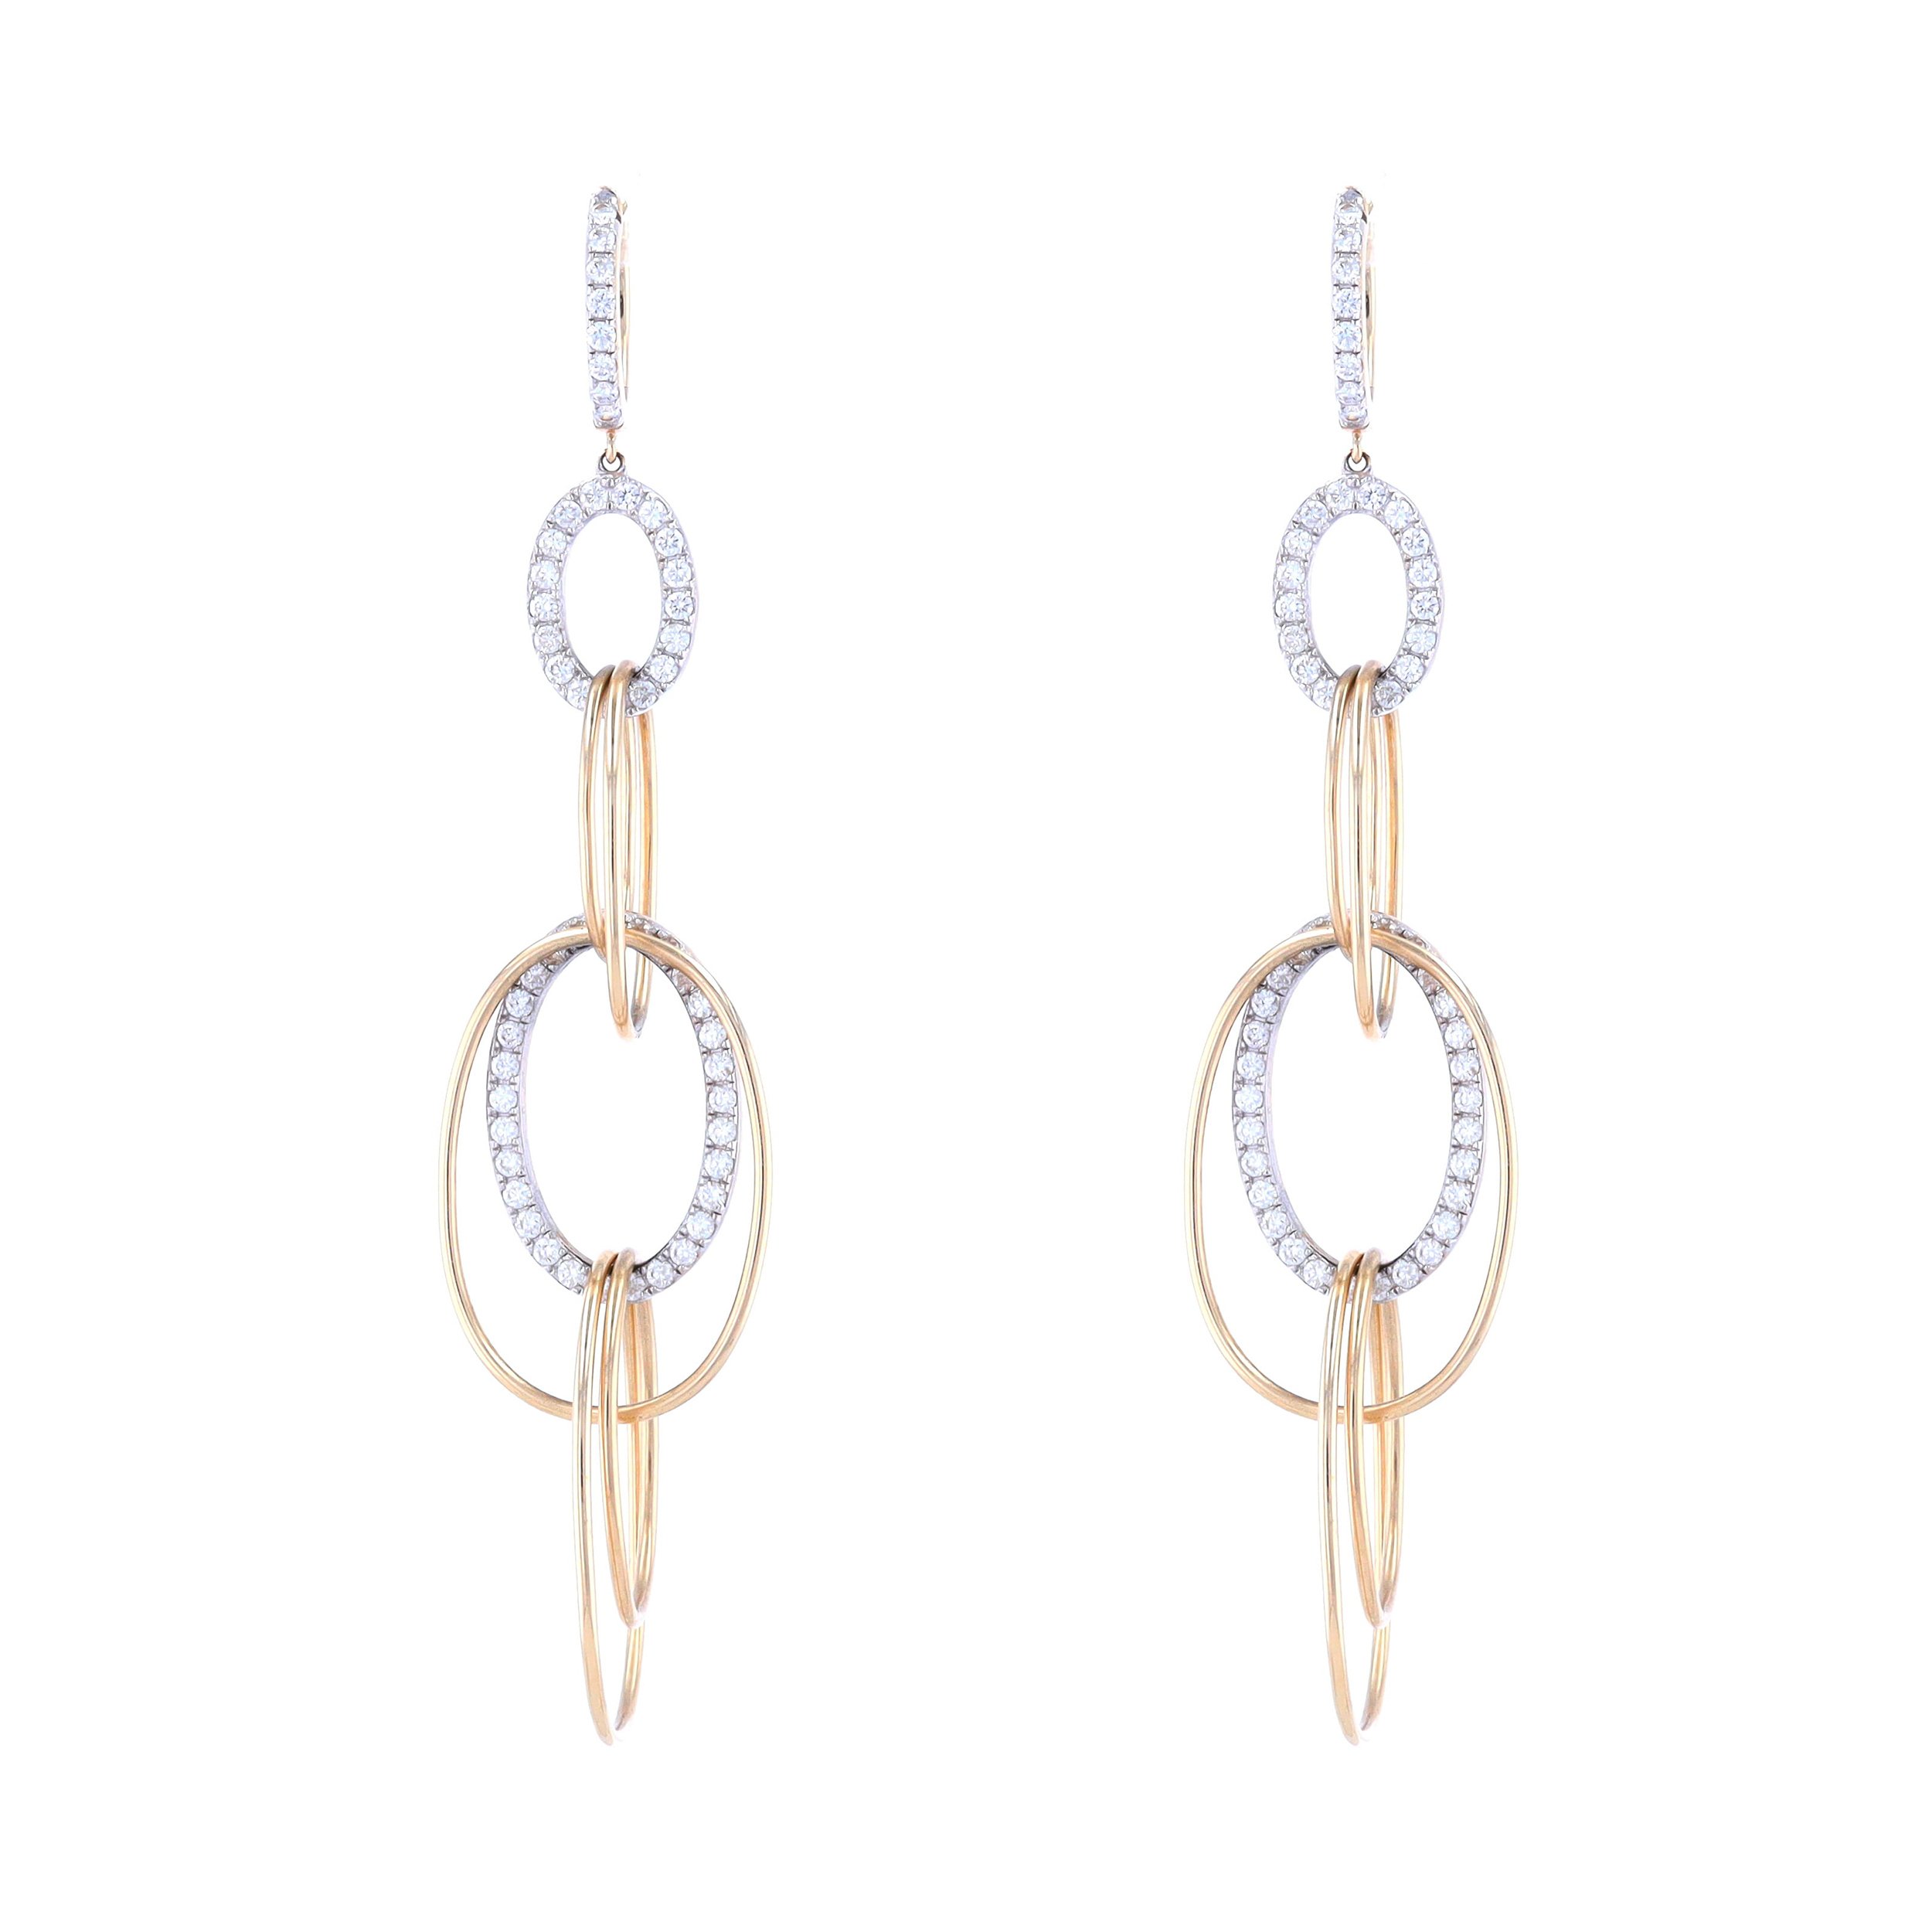 14k Yellow Gold Drop Earrings With Multiple Oval Links Accented With Pace Diamonds